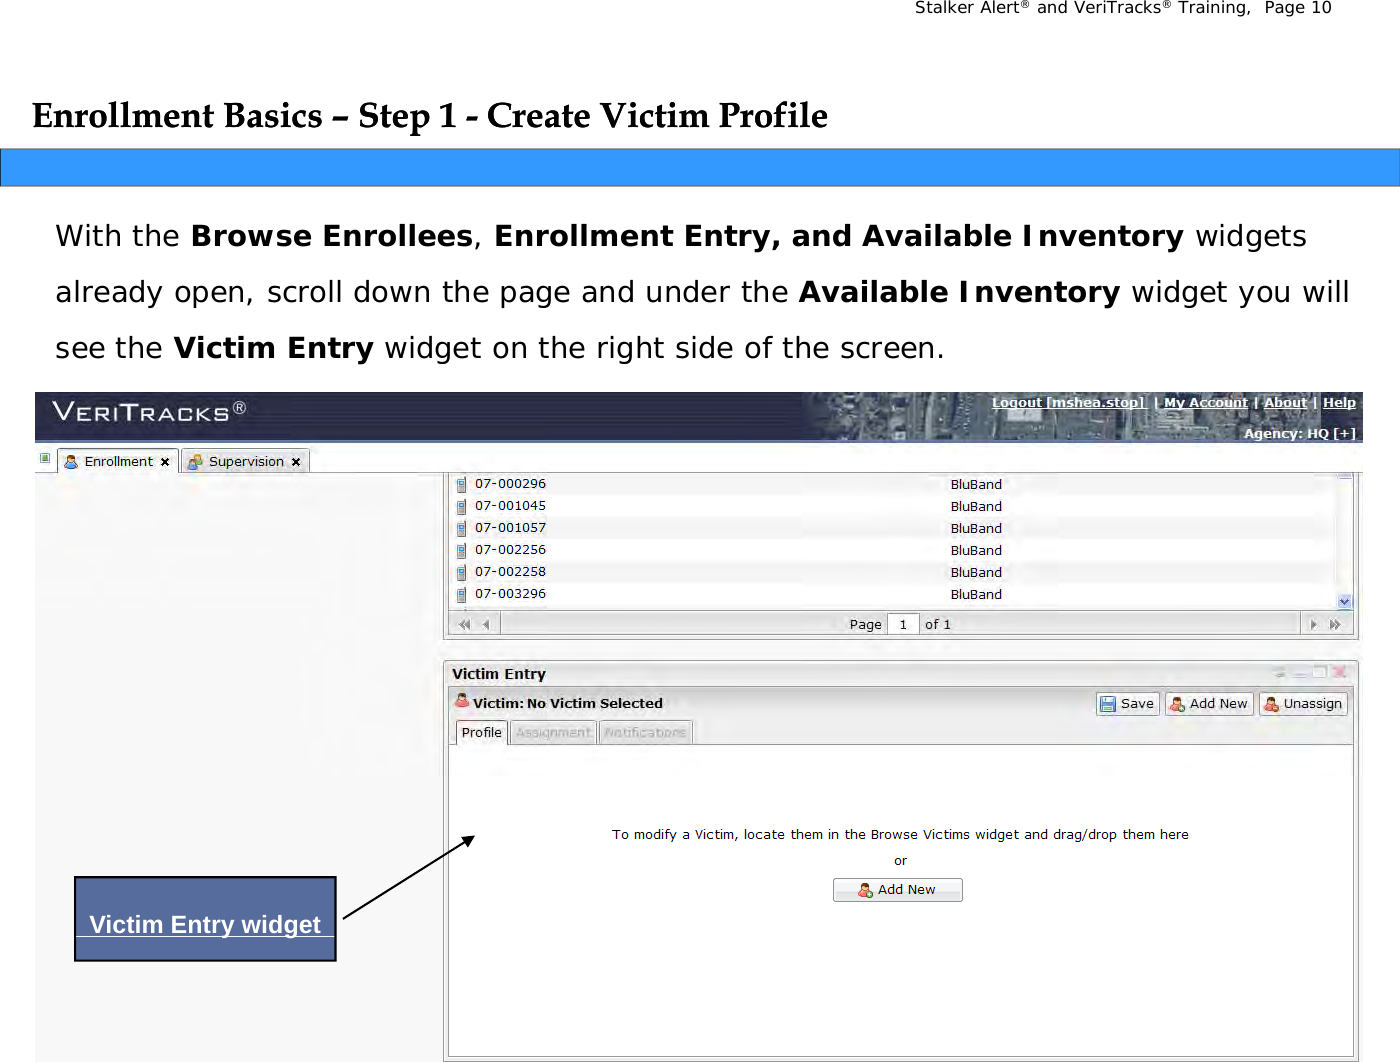 Stalker Alert®and VeriTracks®Training,  Page 10Enrollment Basics Enrollment Basics ––Step 1 Step 1 -- Create Victim ProfileCreate Victim ProfileppWith the Browse Enrollees, Enrollment Entry, and Available Inventory widgets already open  scroll down the page and under the Available Inventorywidget you will already open, scroll down the page and under the Available Inventorywidget you will see the Victim Entry widget on the right side of the screen. Victim Entry widgetyg